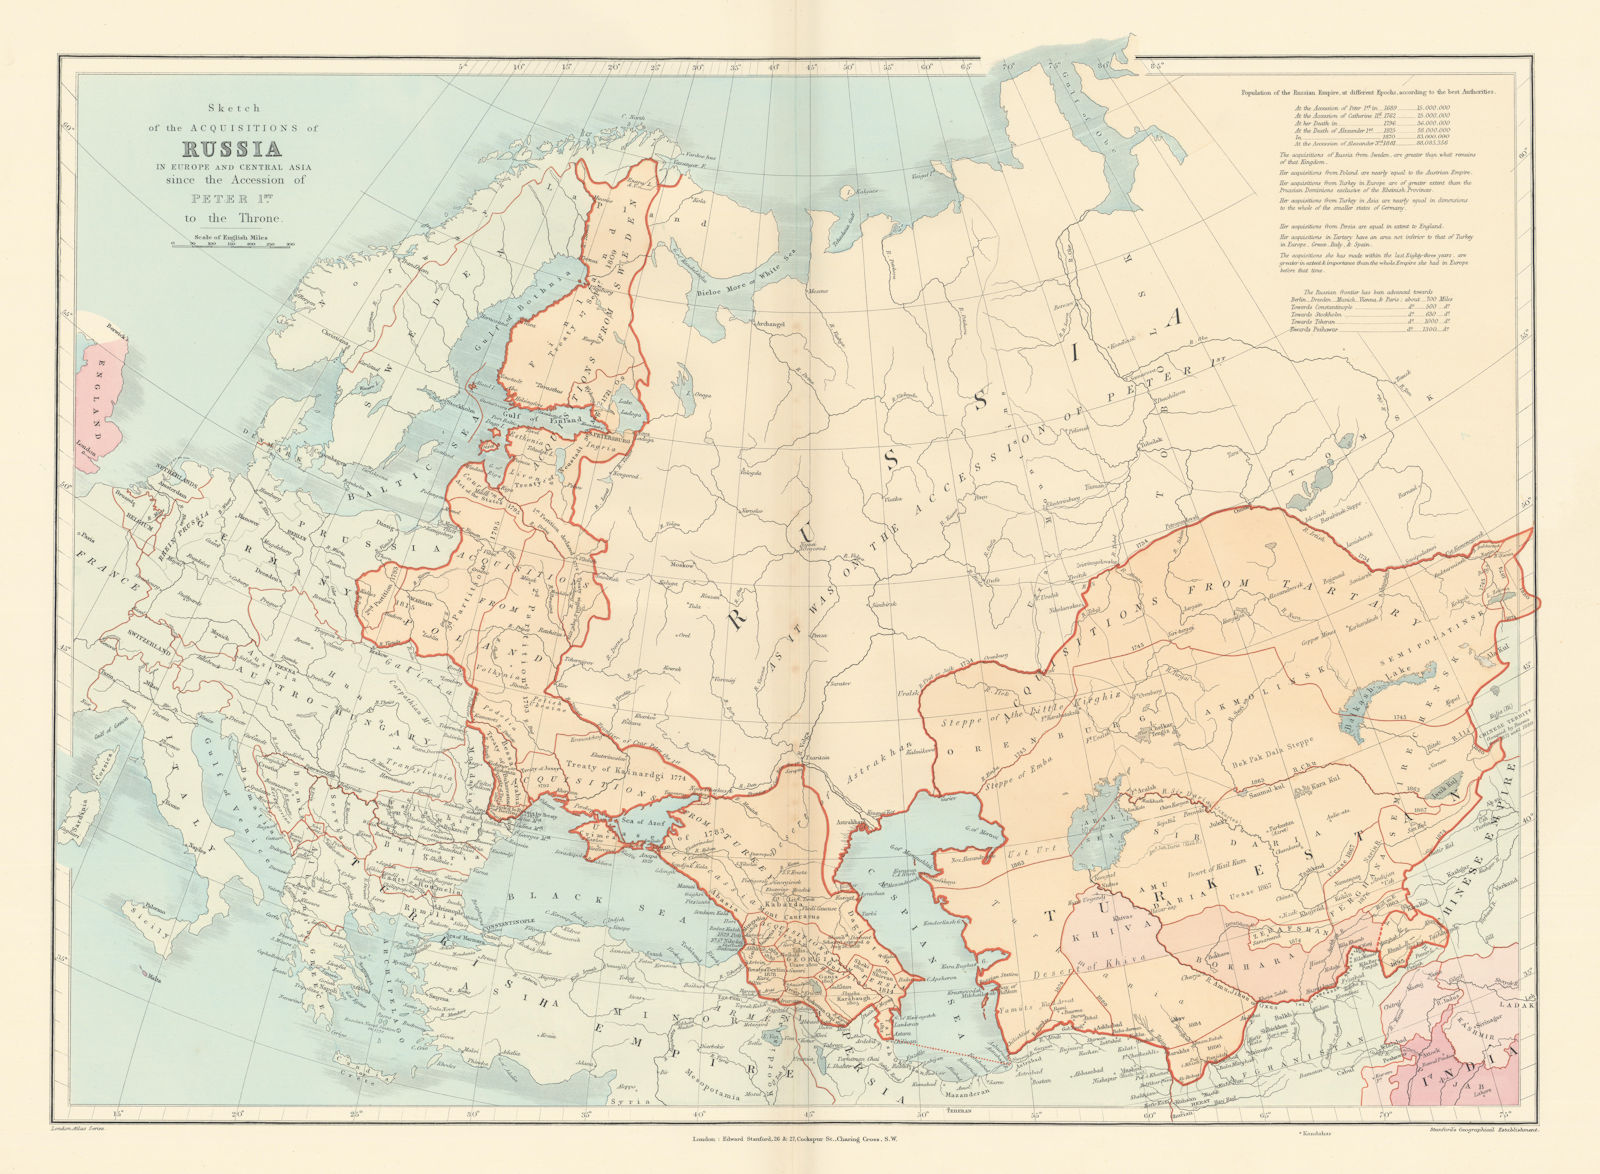 Associate Product Russian acquisitions in Europe & Central Asia since 1689. STANFORD 1896 map